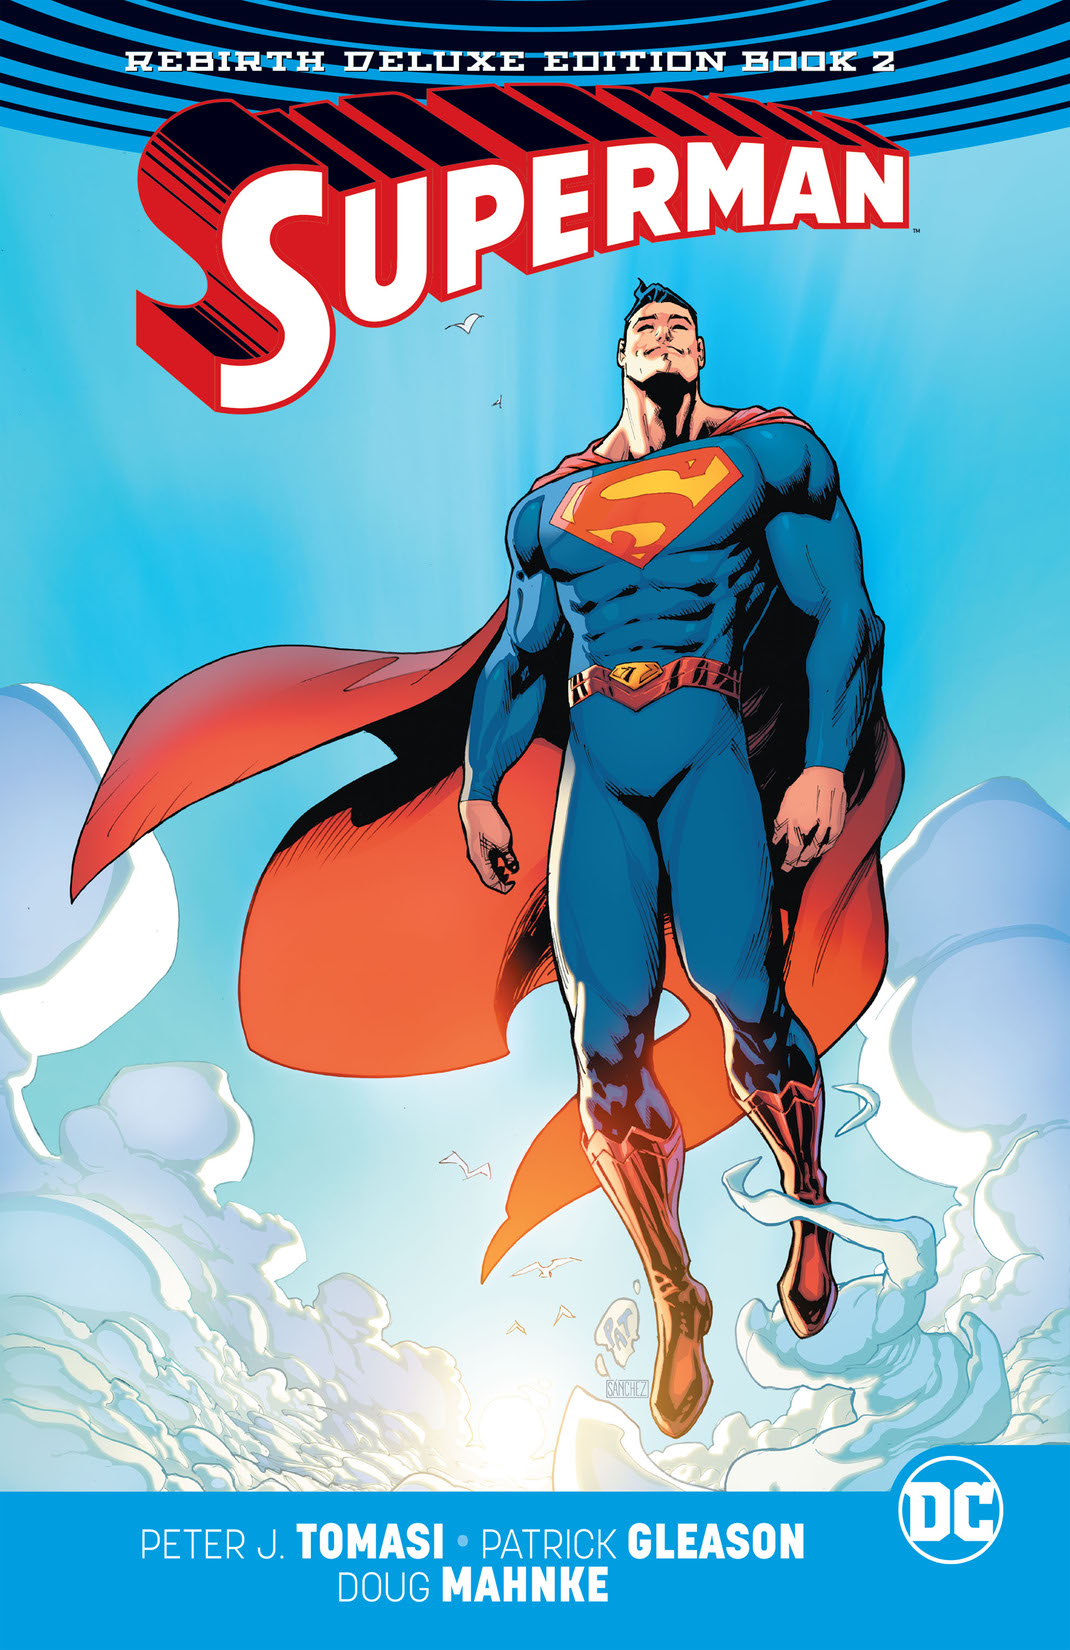 Superman: The Rebirth Deluxe Edition Book 2 preview images